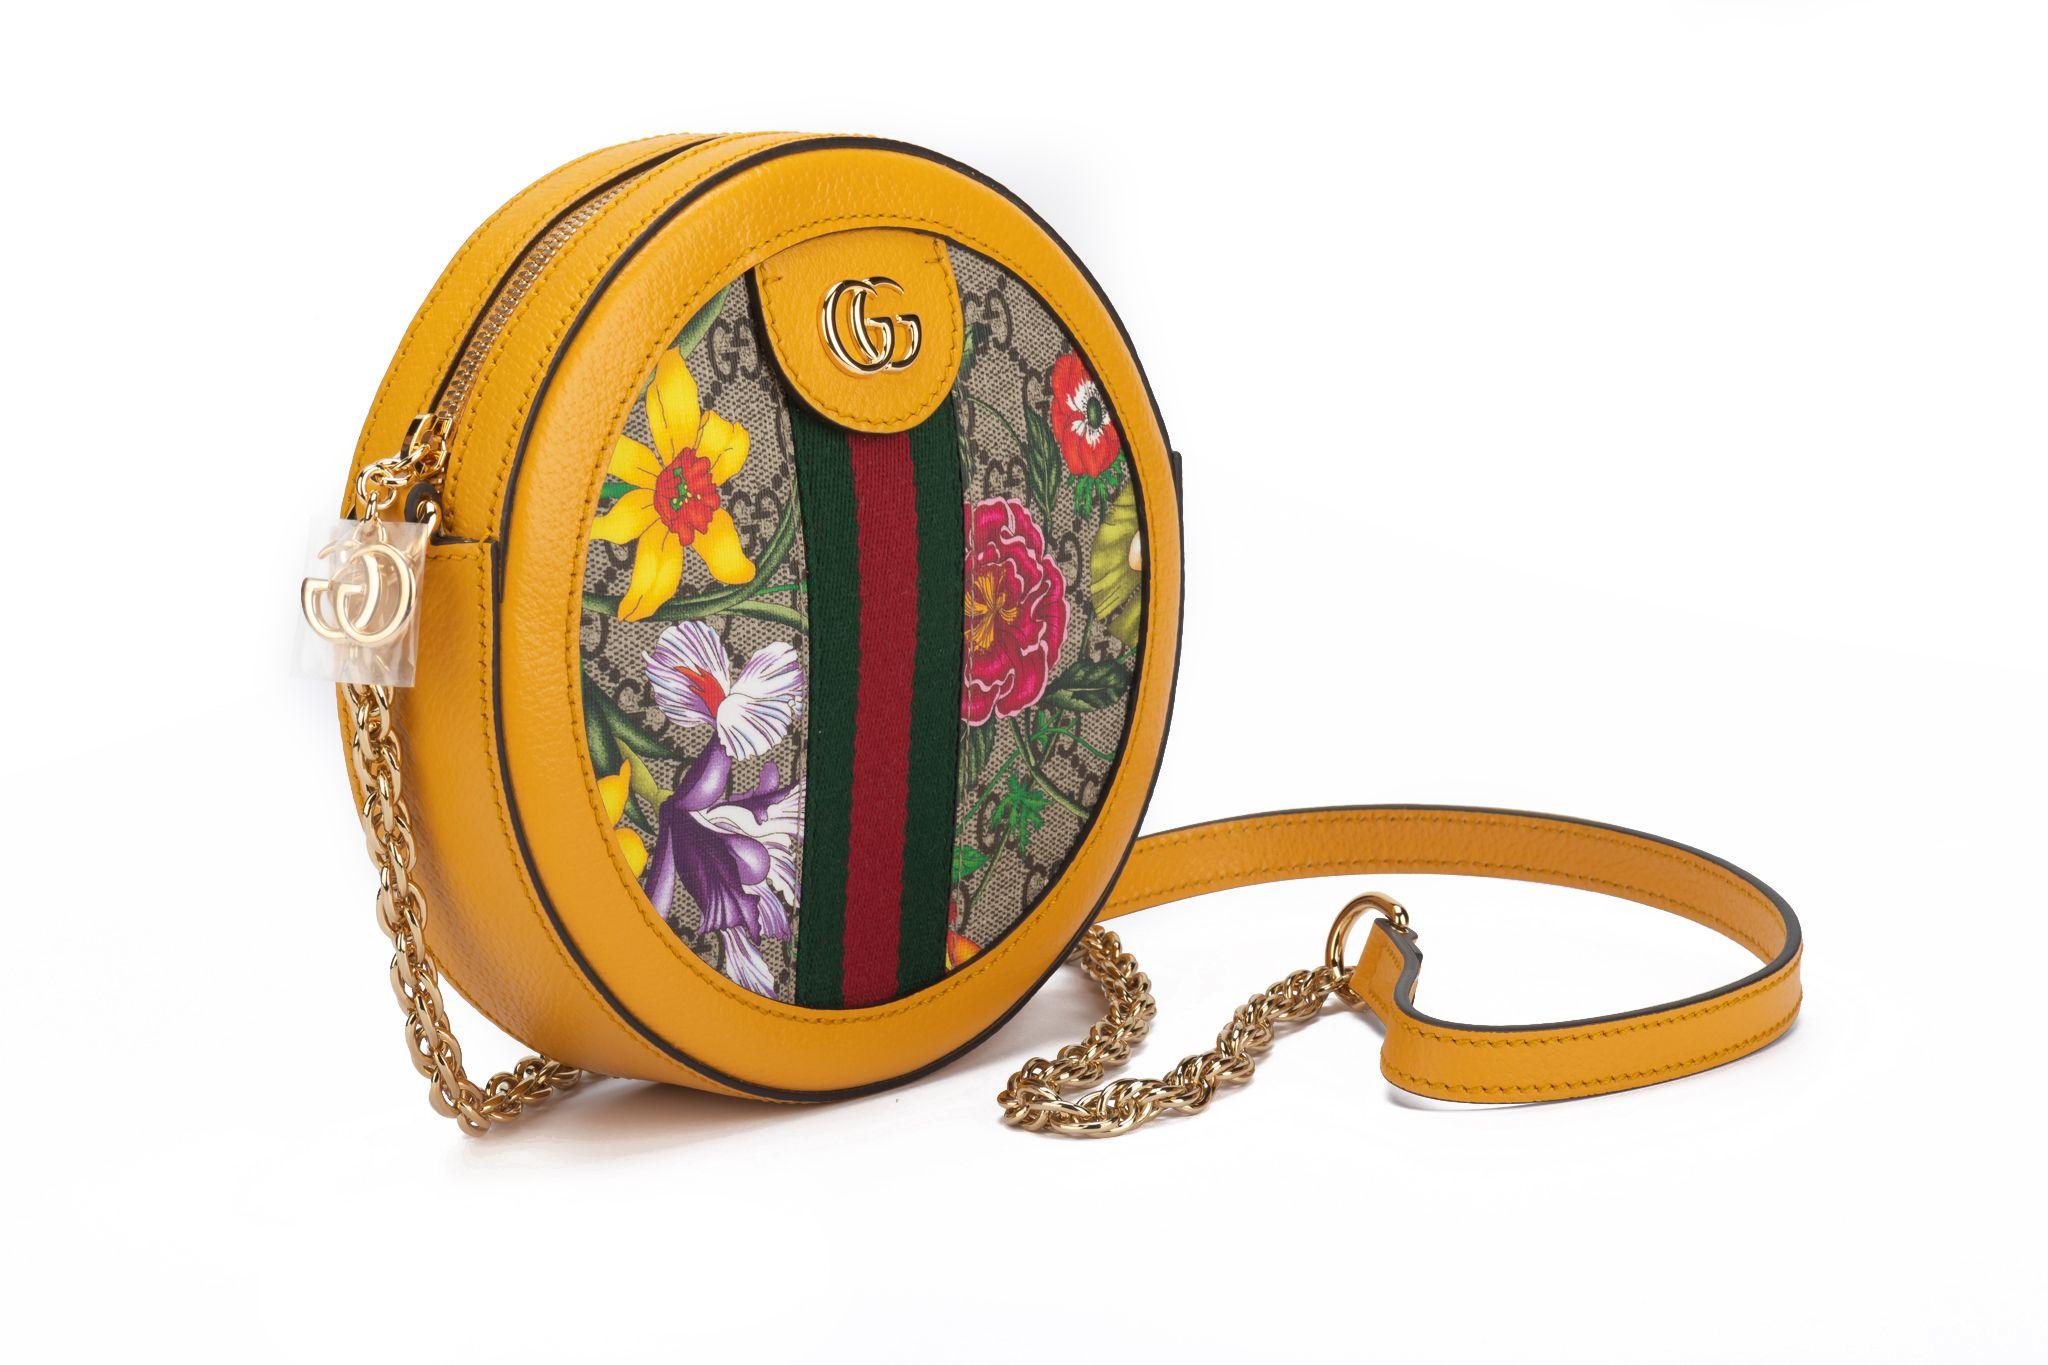 Gucci brand new flora coated canvas round bag with soleil yellow leather trim. Detachable shoulder strap 22.5”, can be worn cross body. Comes with booklet and original dust cover.